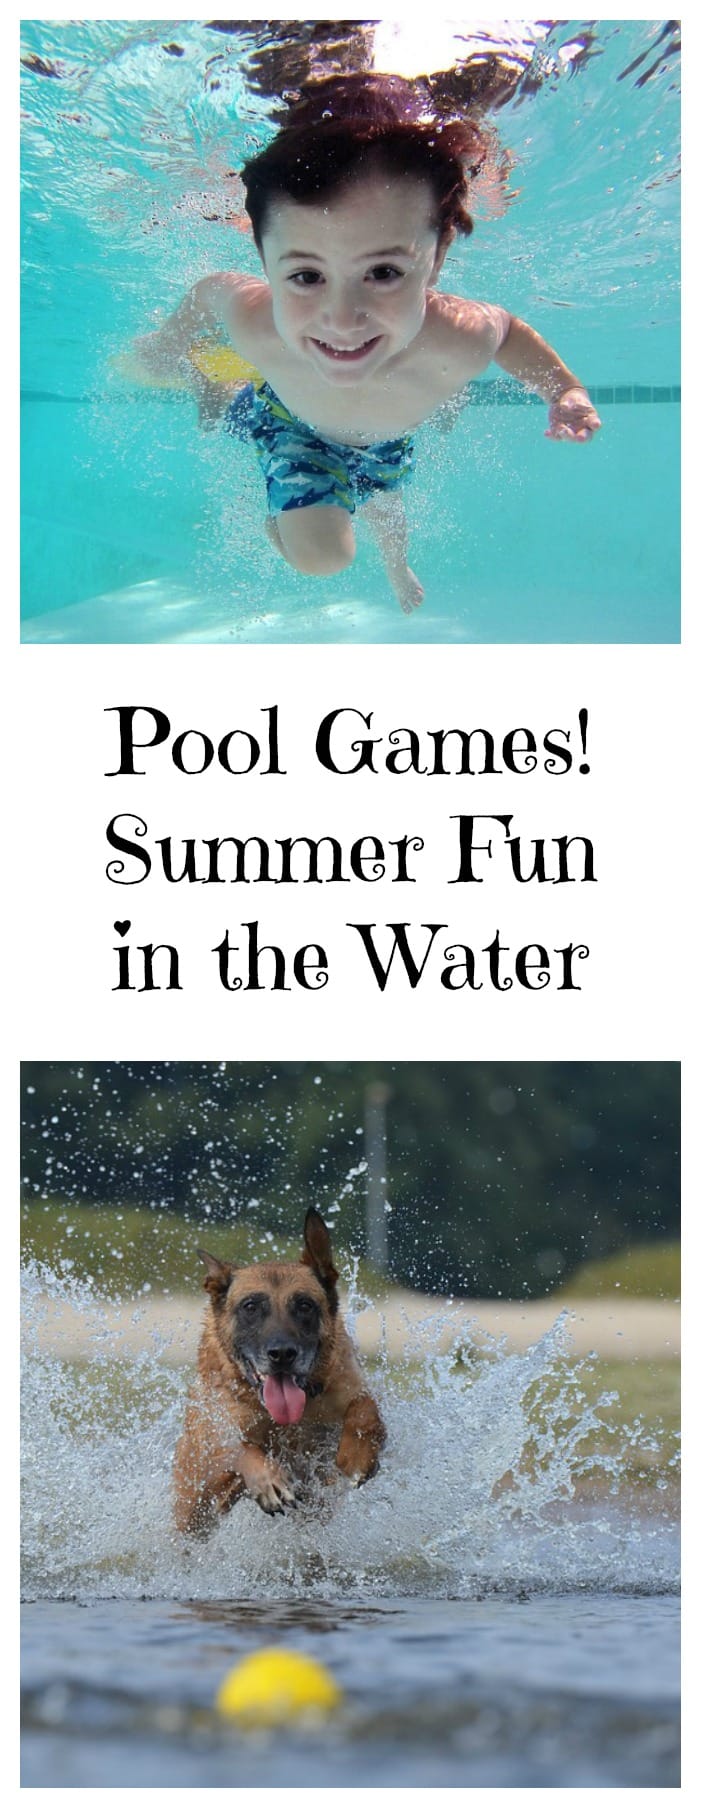 Games For The Pool Summer Fun for Kids